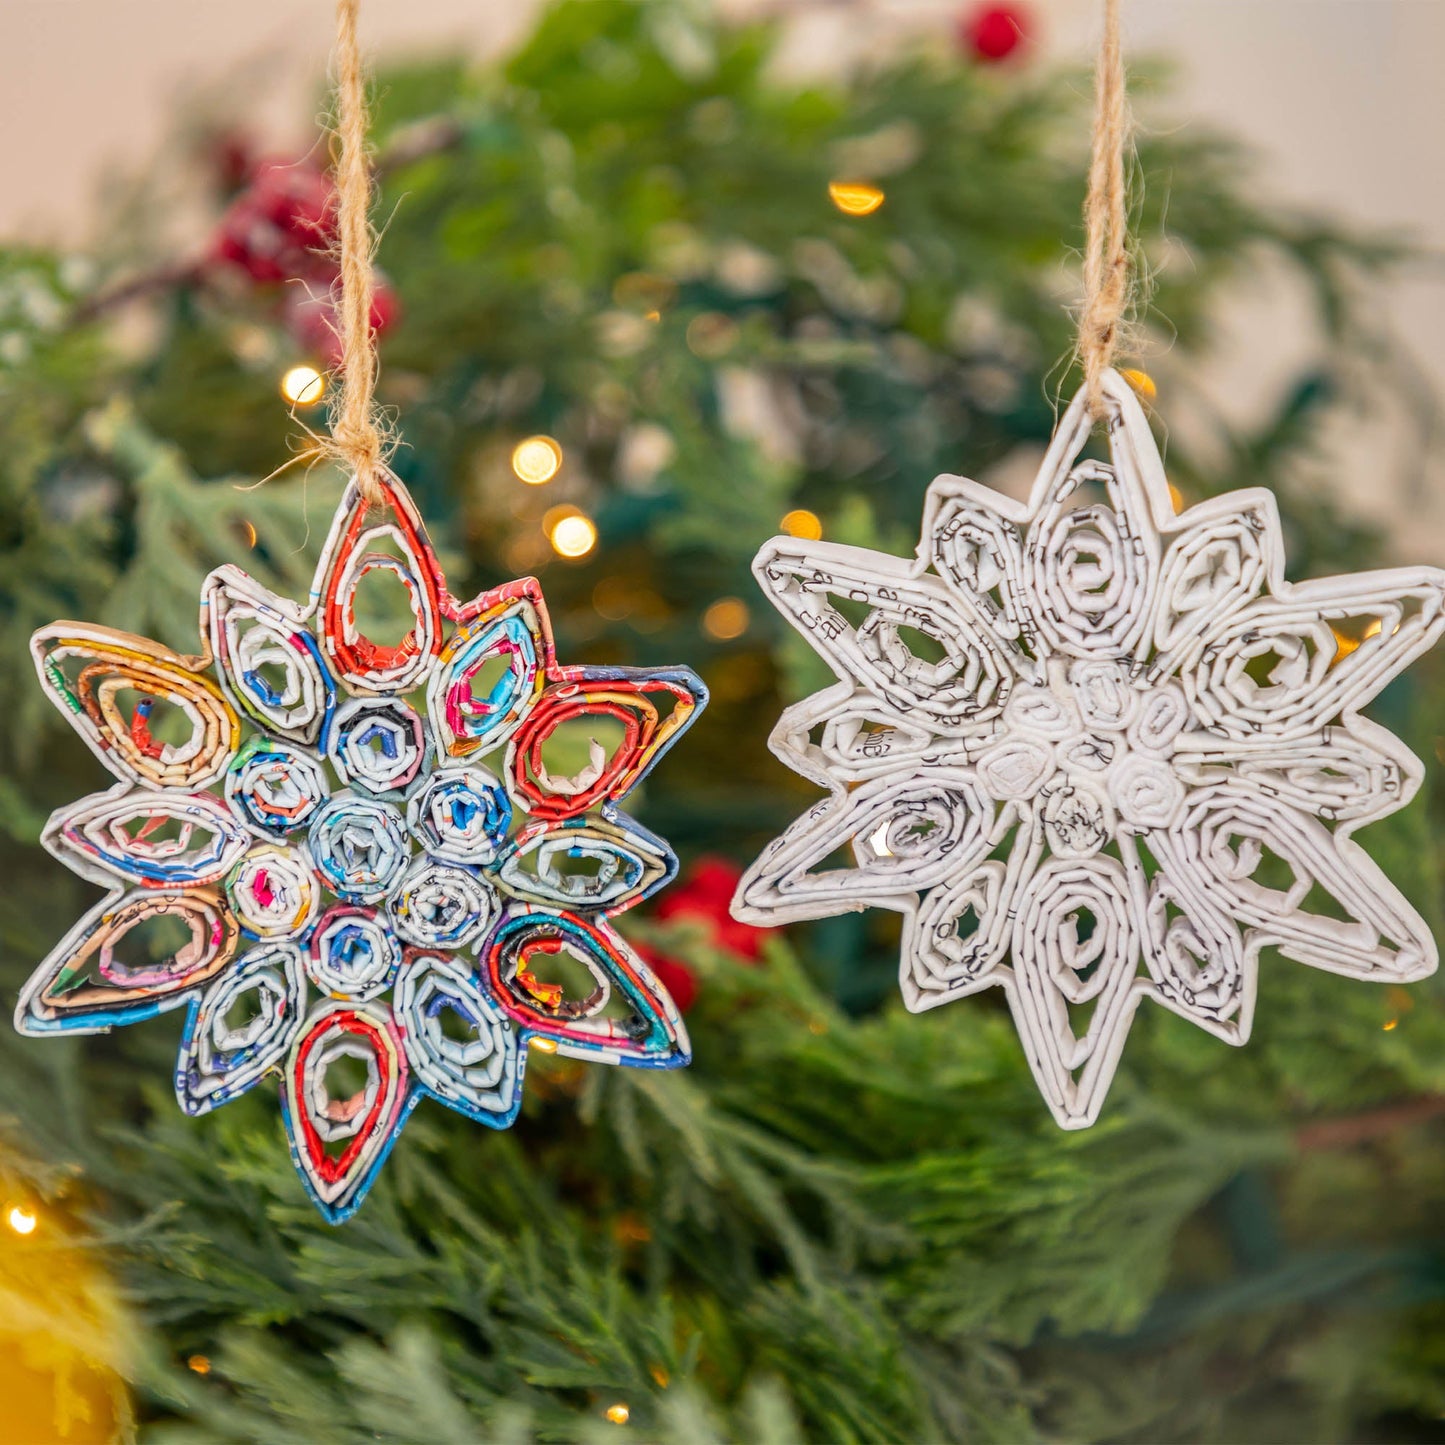 Recycled Magazine Snowflake Ornaments - Set of 2